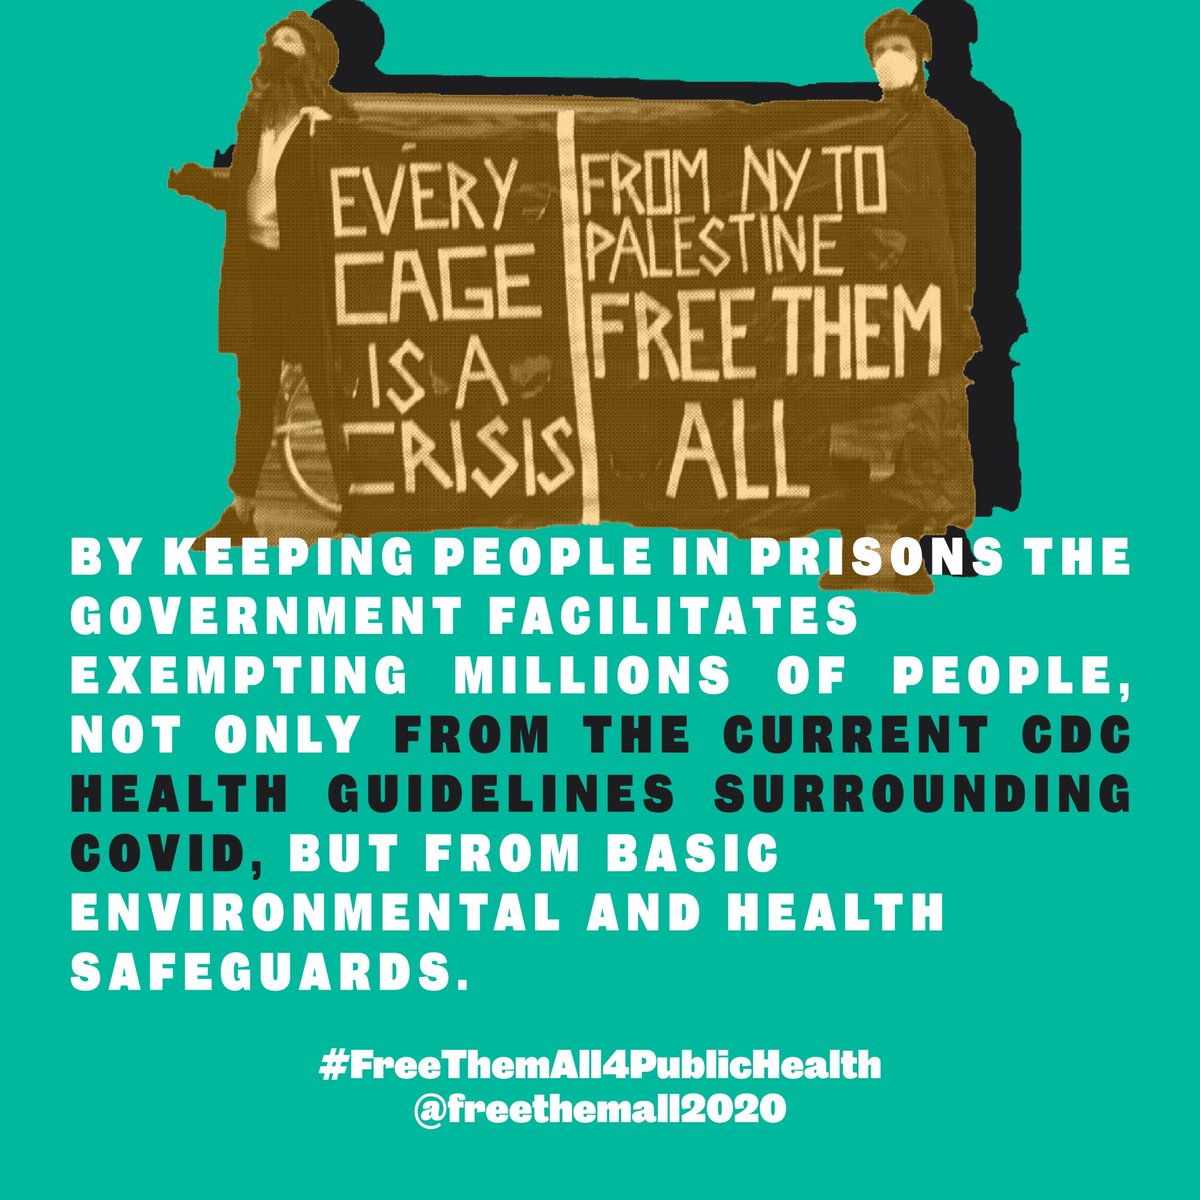 By keeping people in prisons the government facilities exempt millions of people not only from the current CDC health guidelines surrounding COVID but from basic environmental and health safeguards.